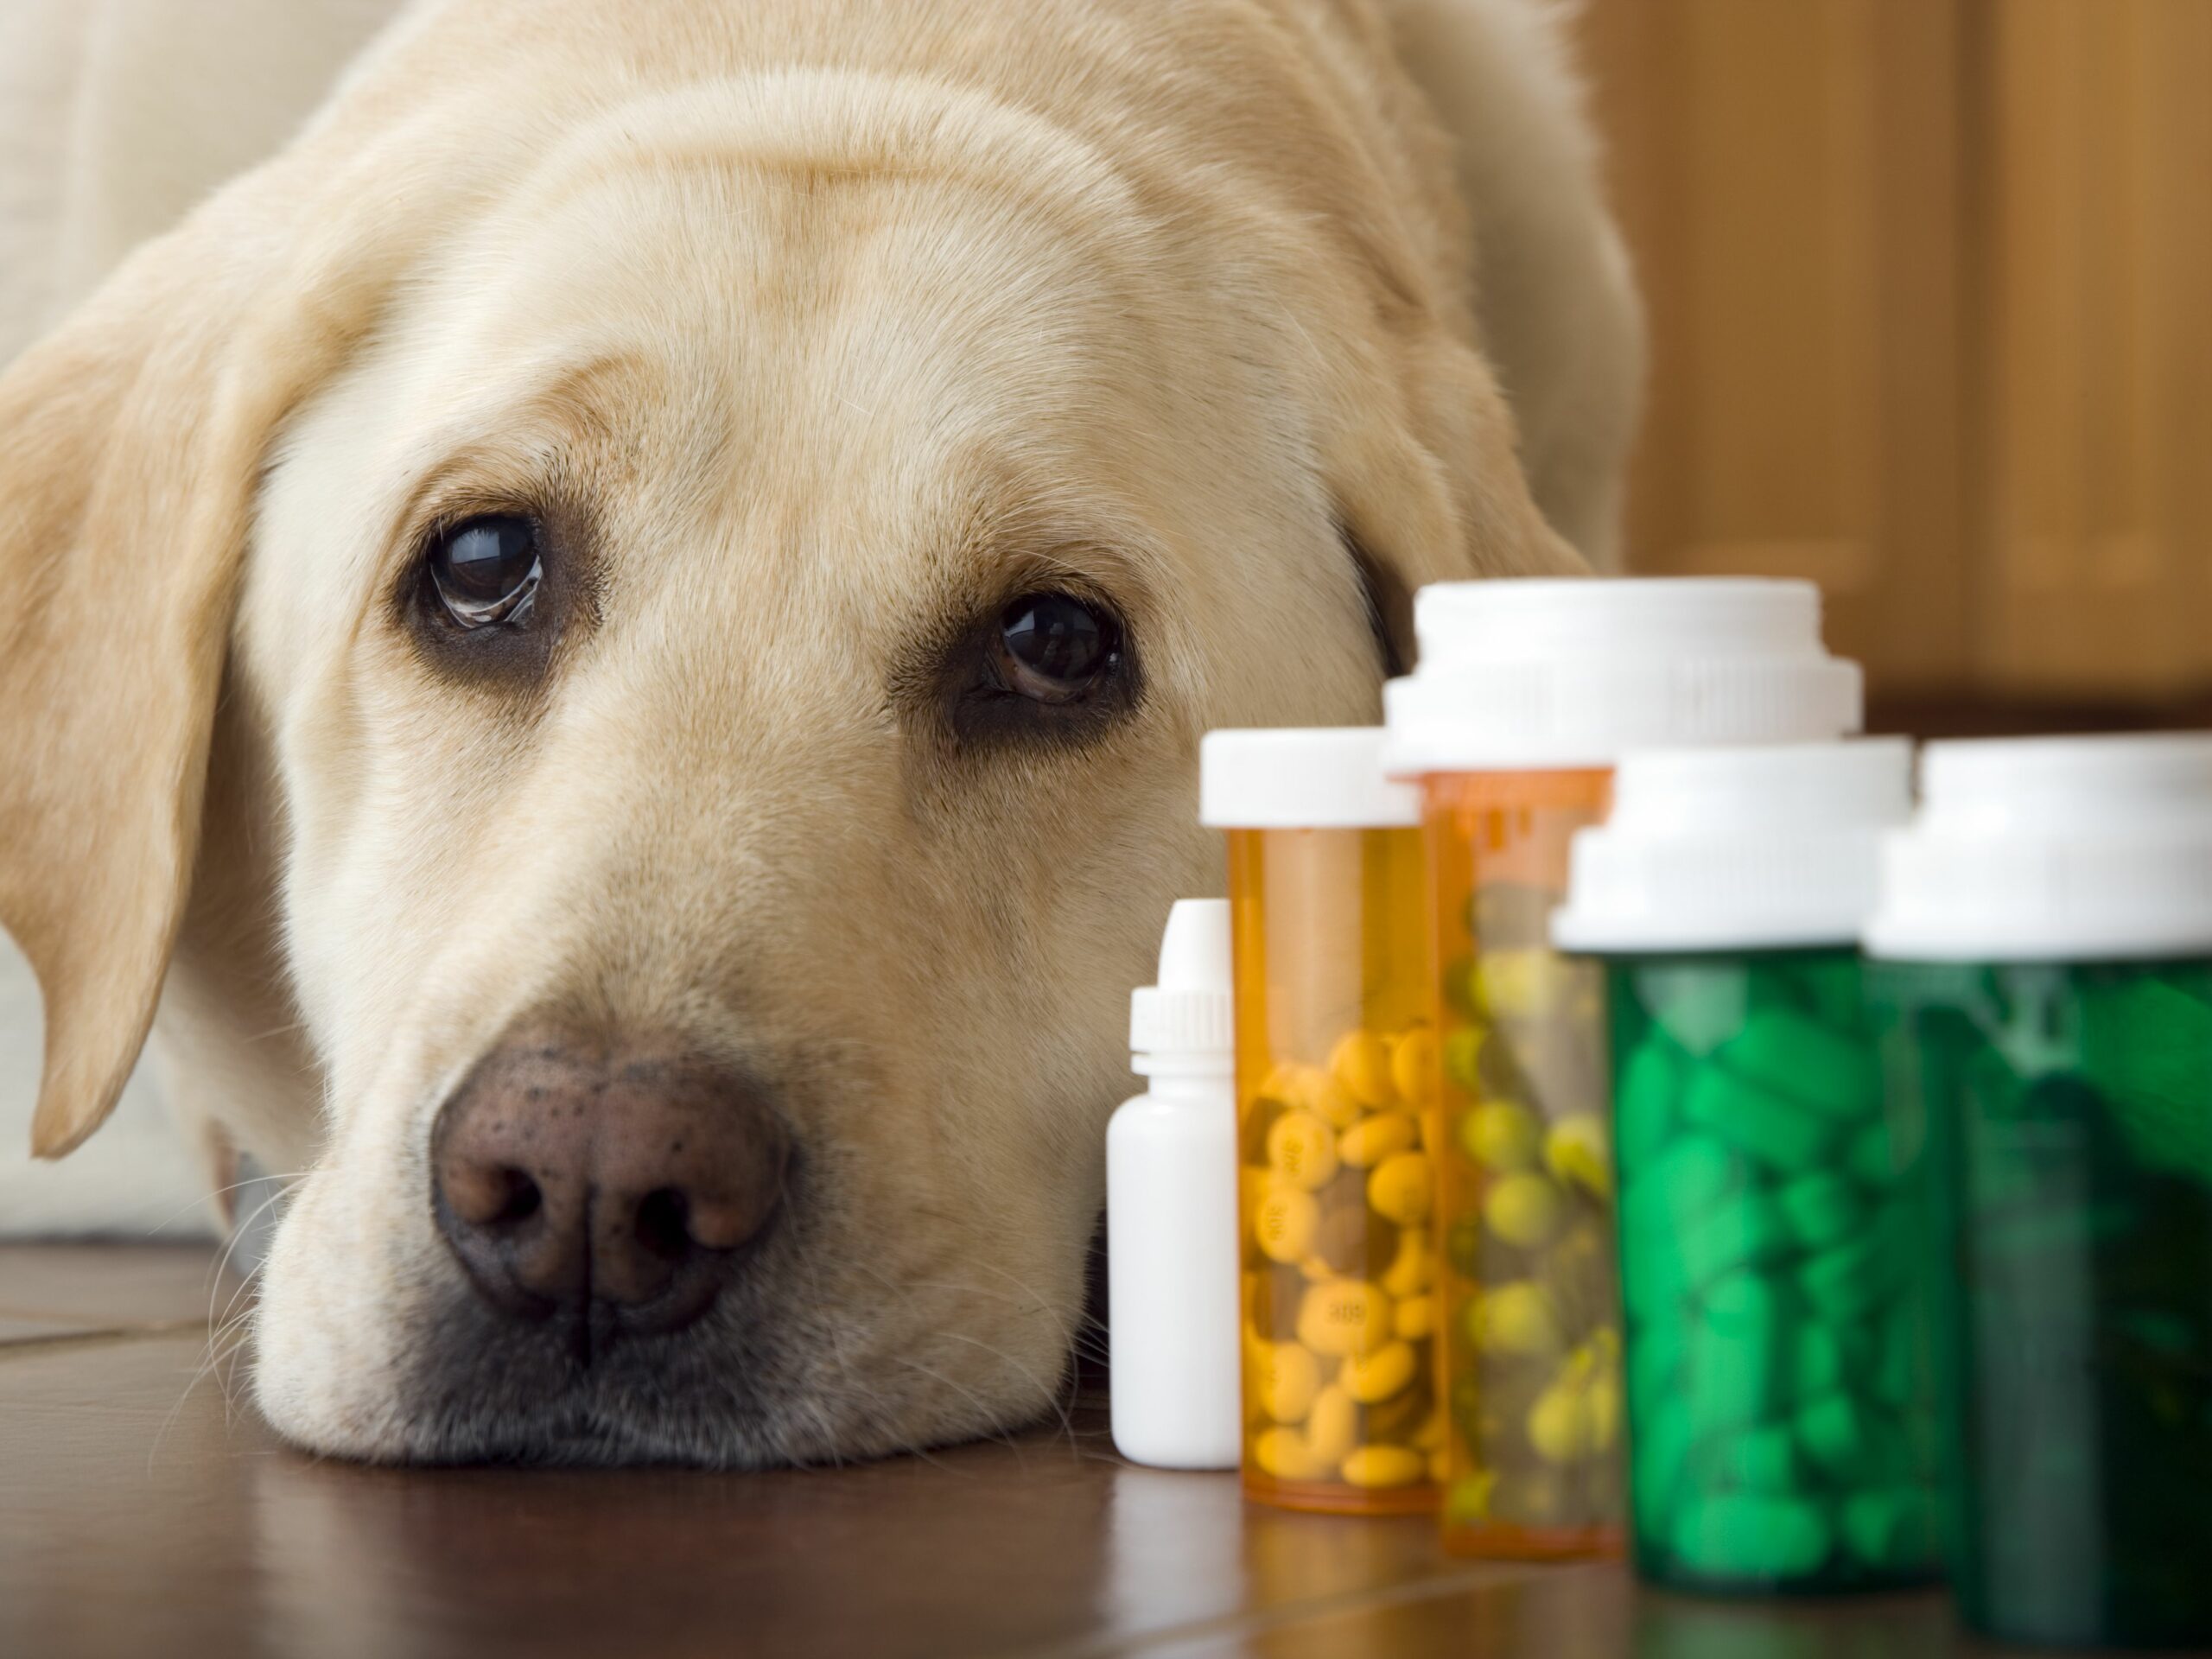 What works as an antibiotic for dogs?